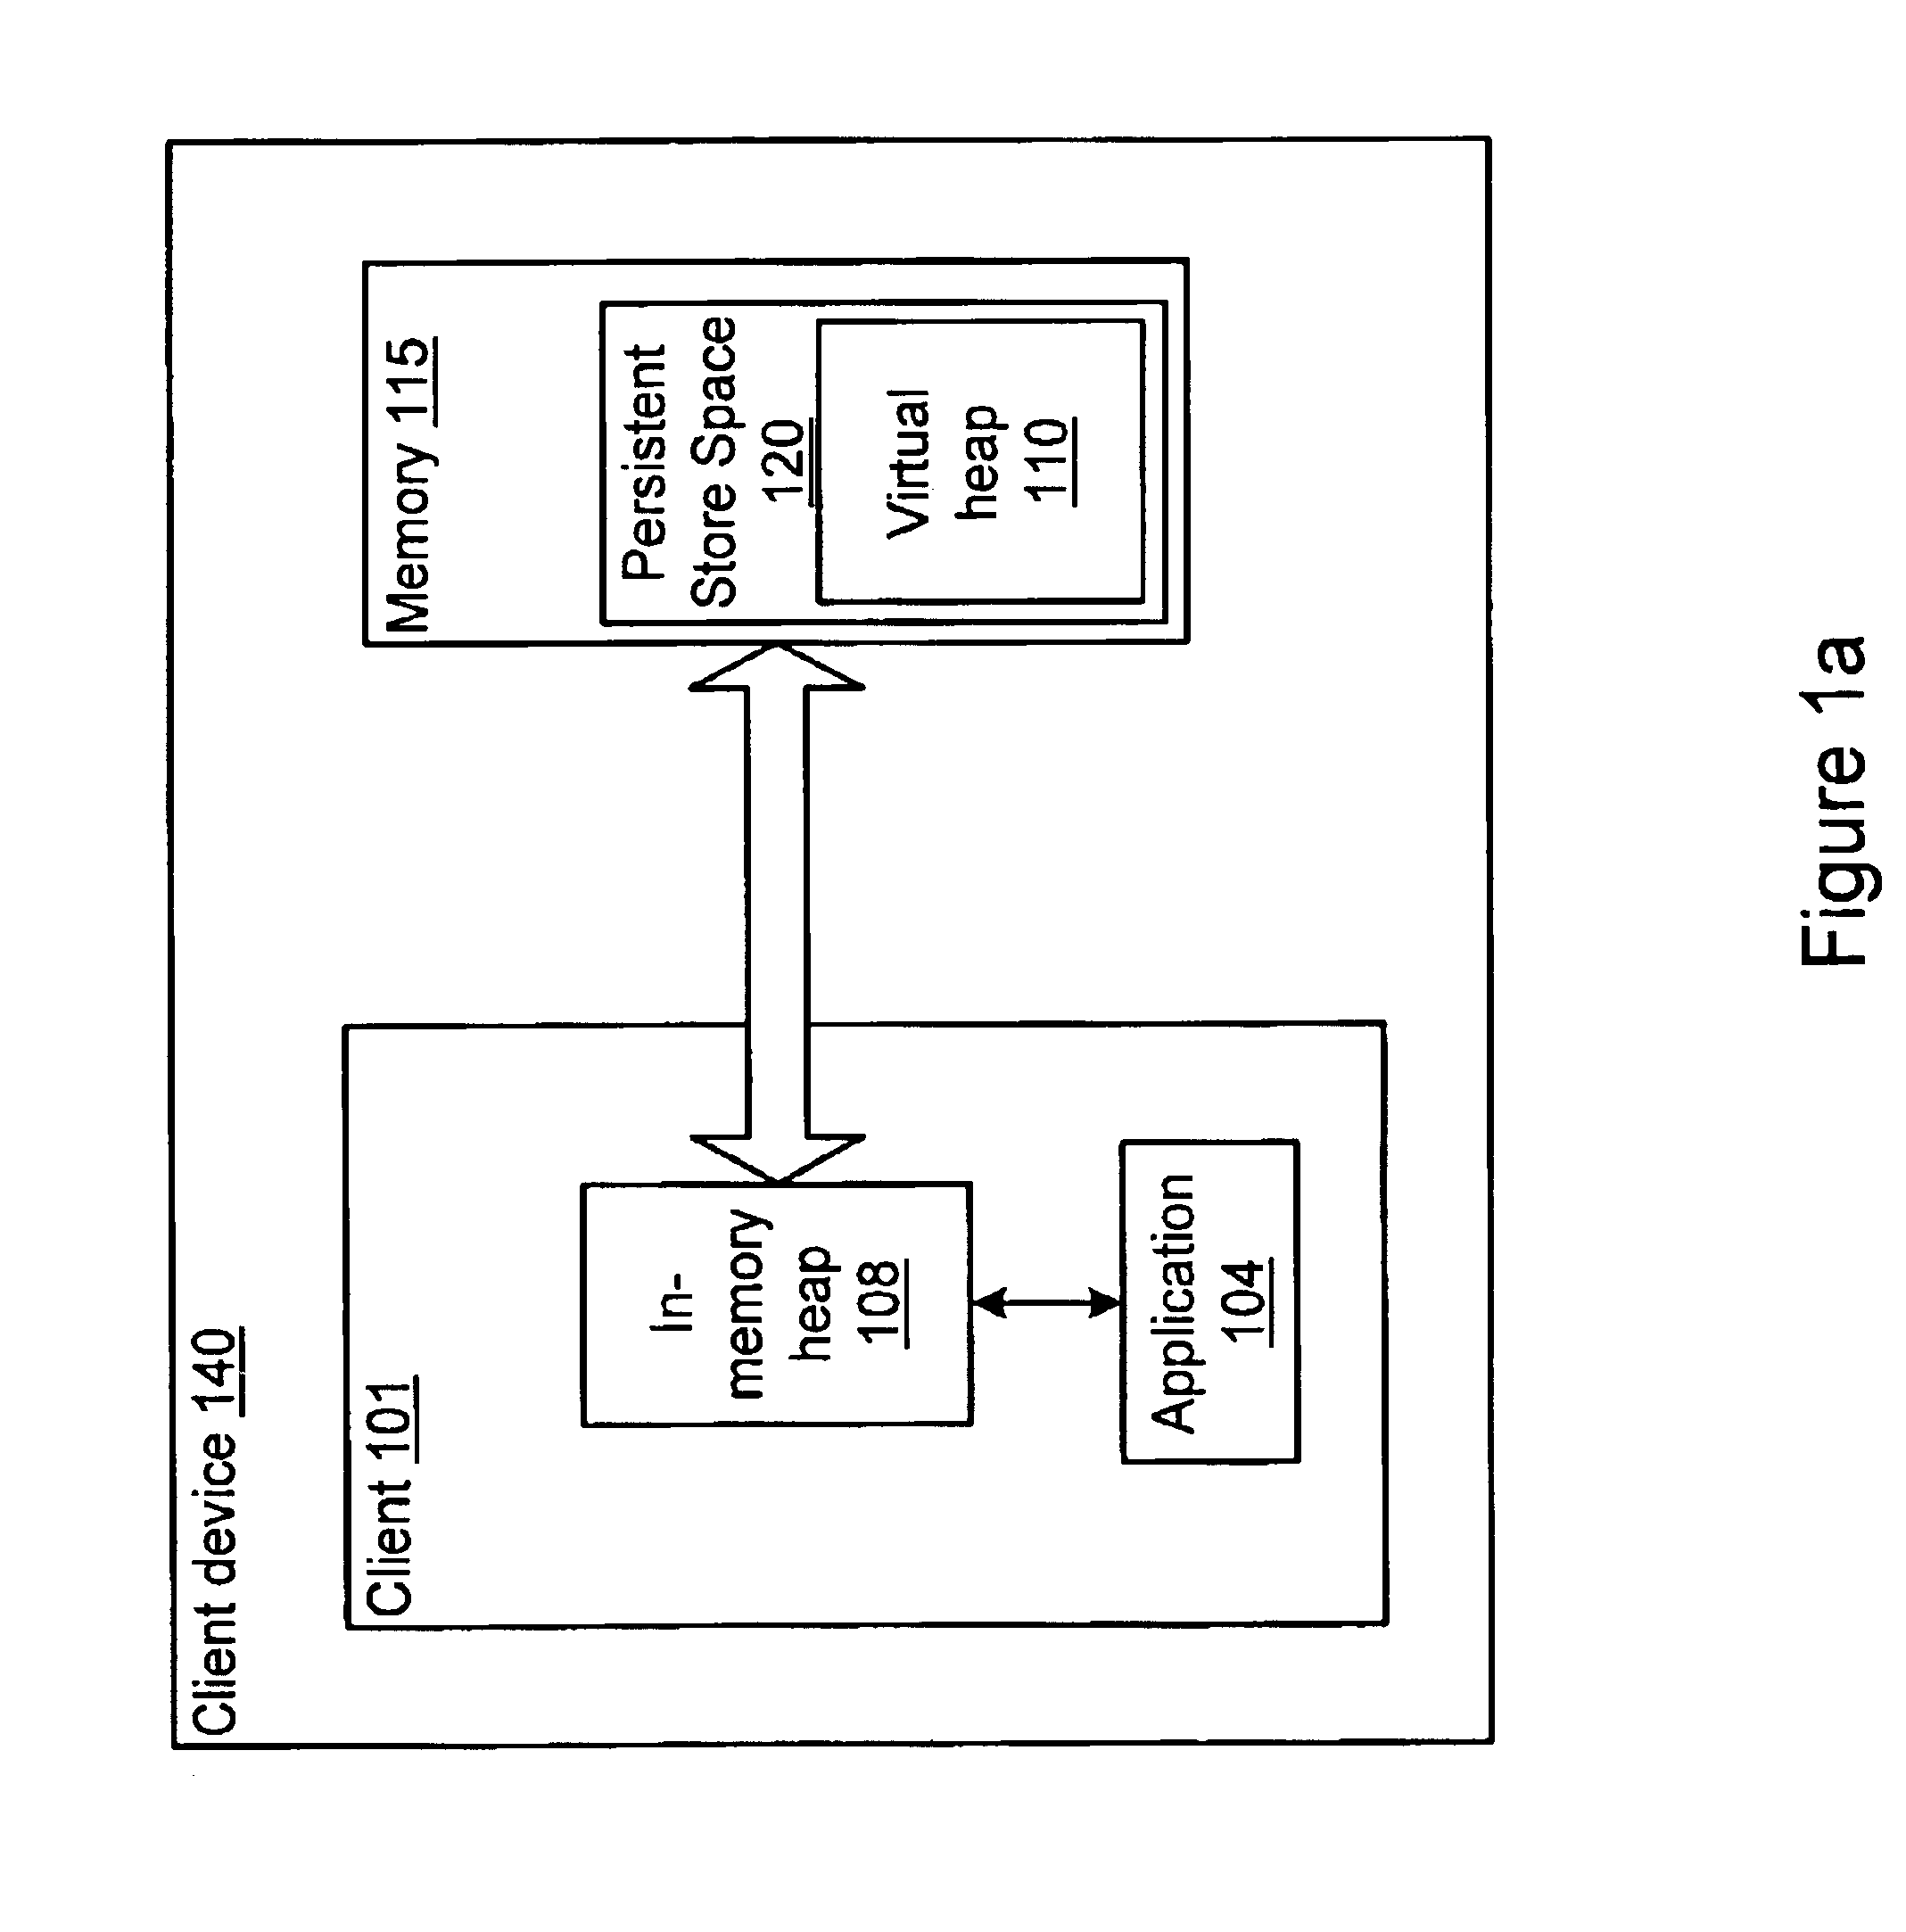 System and method for migrating processes on a network